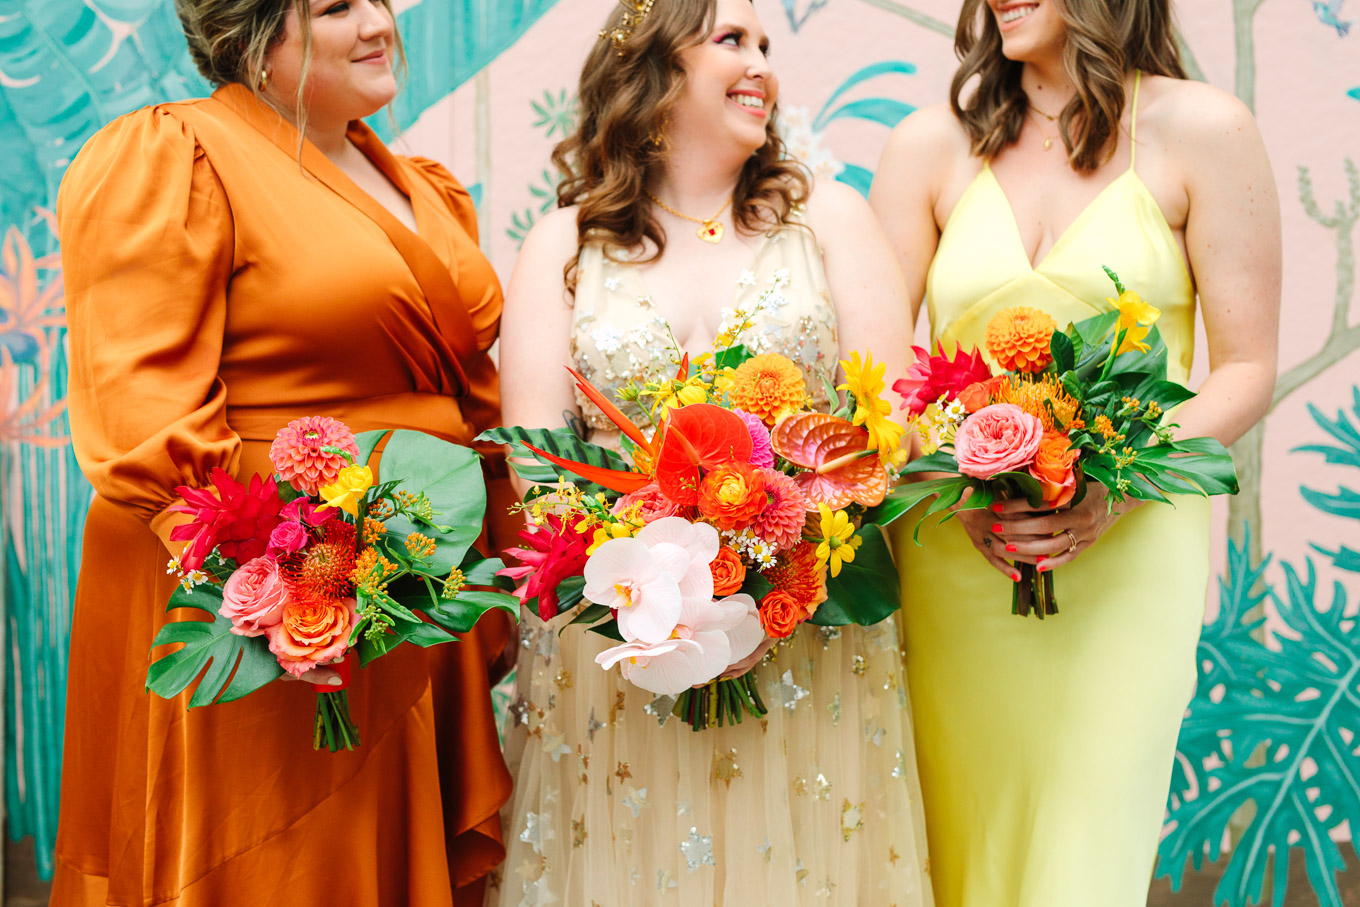 Bridesmaids with tropical bouquets | Colorful Downtown Los Angeles Valentine Wedding | Los Angeles wedding photographer | #losangeleswedding #colorfulwedding #DTLA #valentinedtla   Source: Mary Costa Photography | Los Angeles